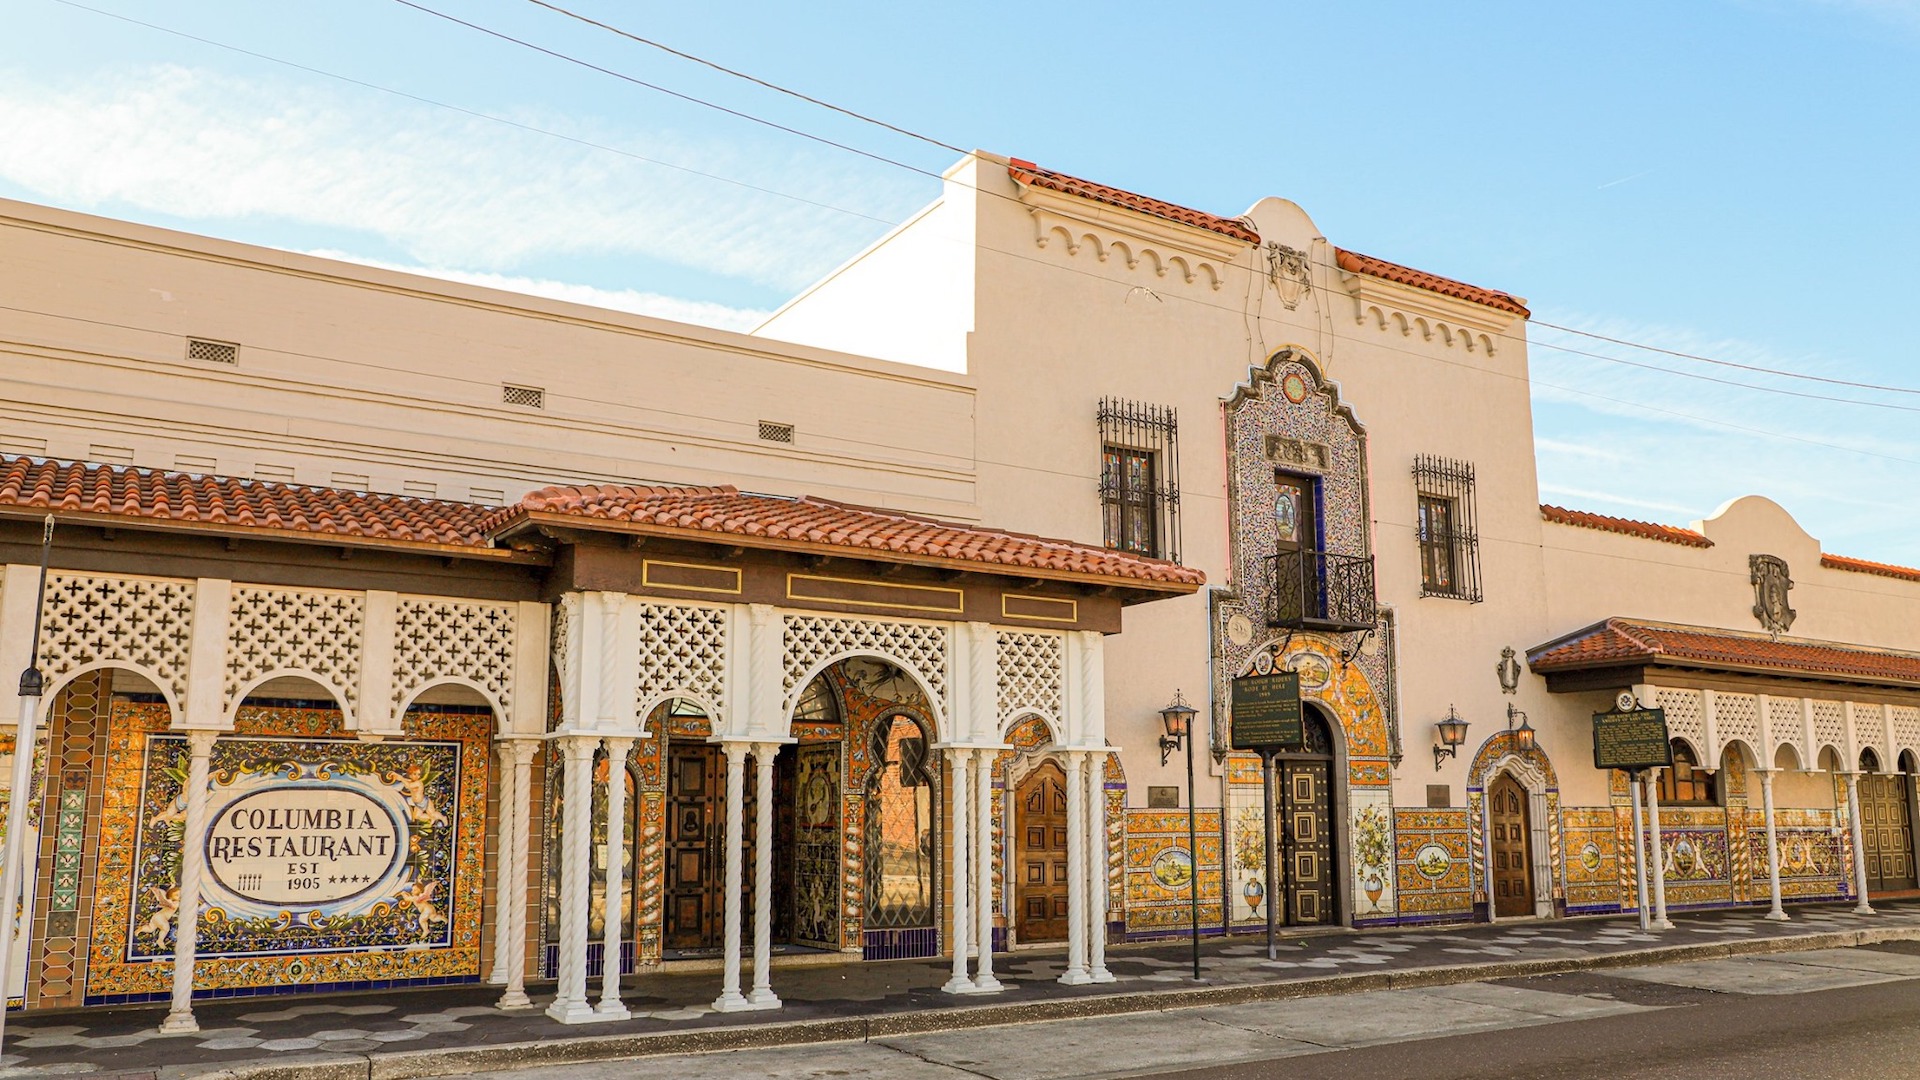 Exterior of a historic restaurant in Ybor City